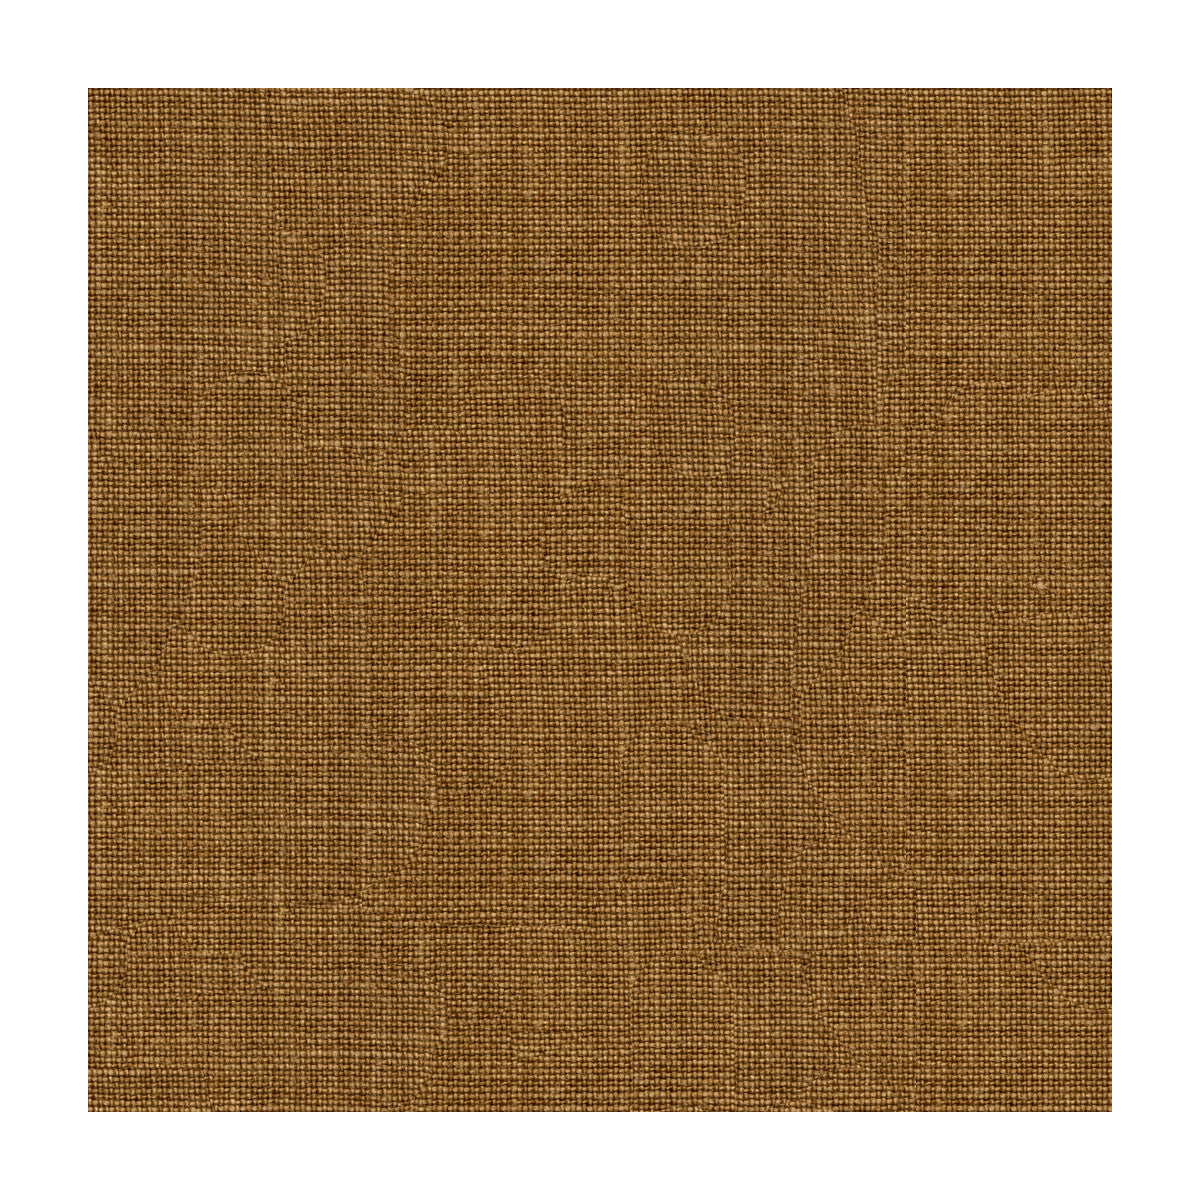 Kravet Basics fabric in 33767-6 color - pattern 33767.6.0 - by Kravet Basics in the Perfect Plains collection